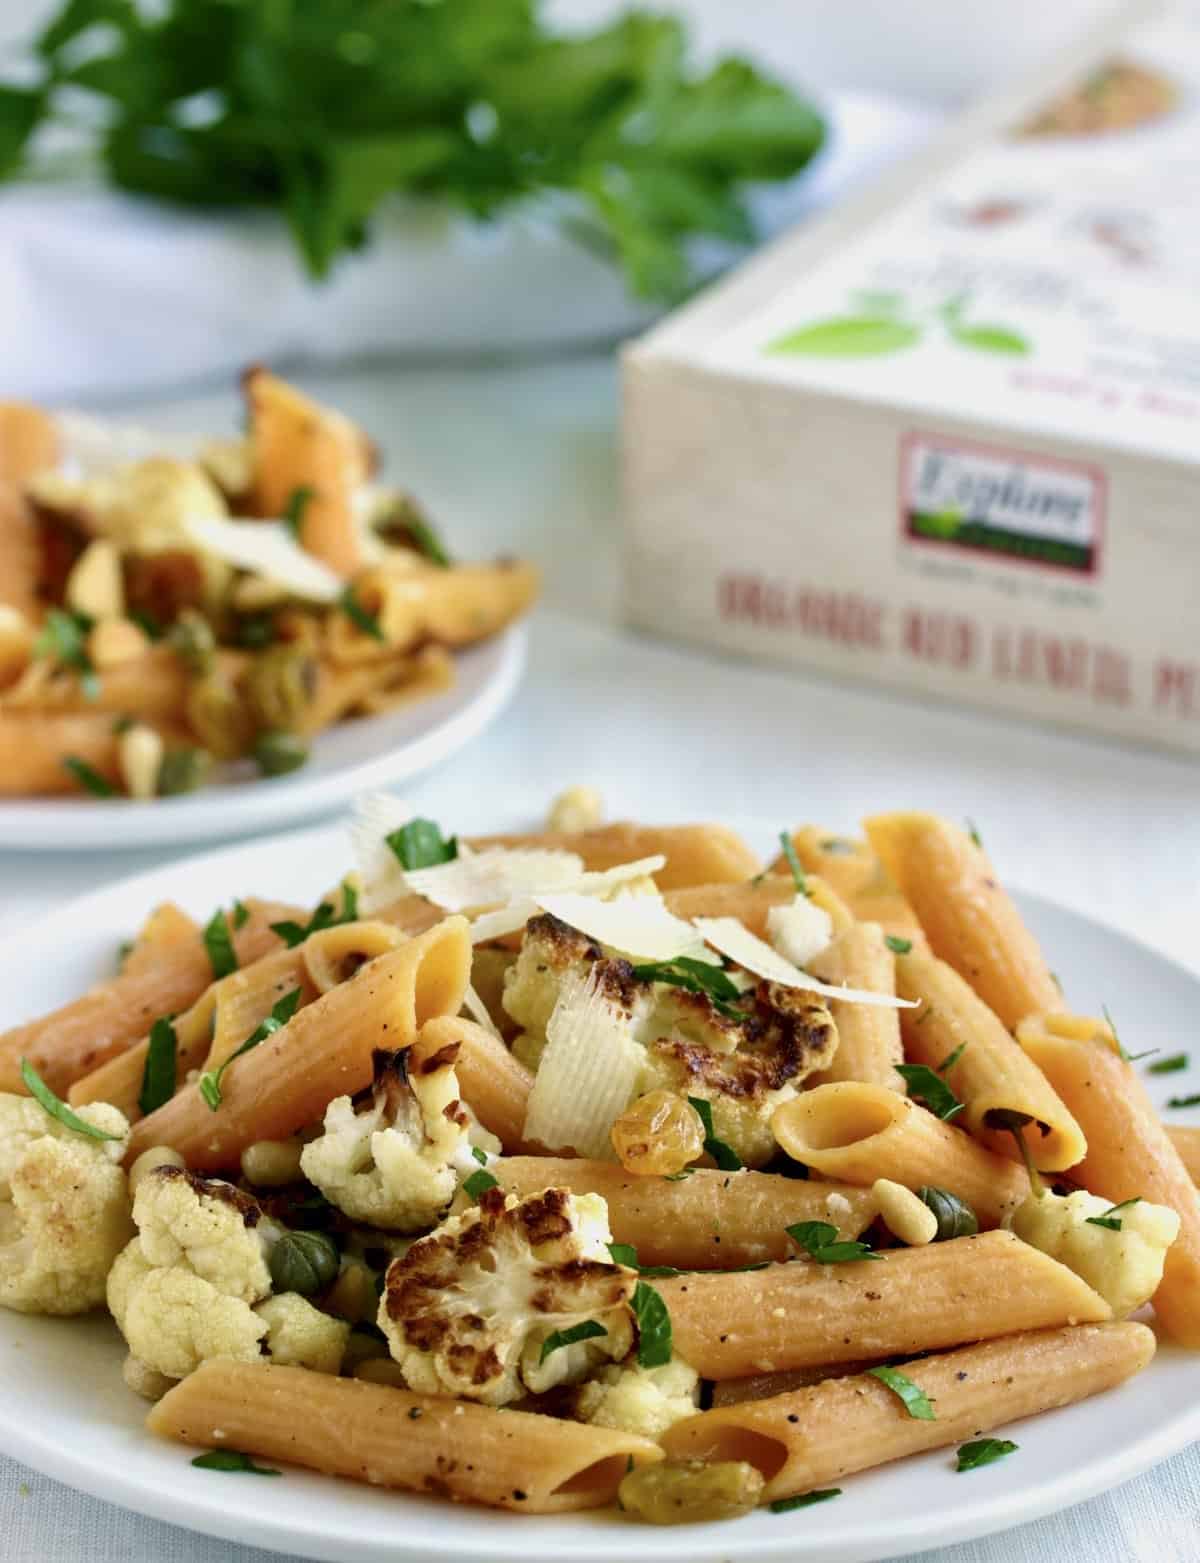 plates of penne pasta with cauliflower, herbs and product package